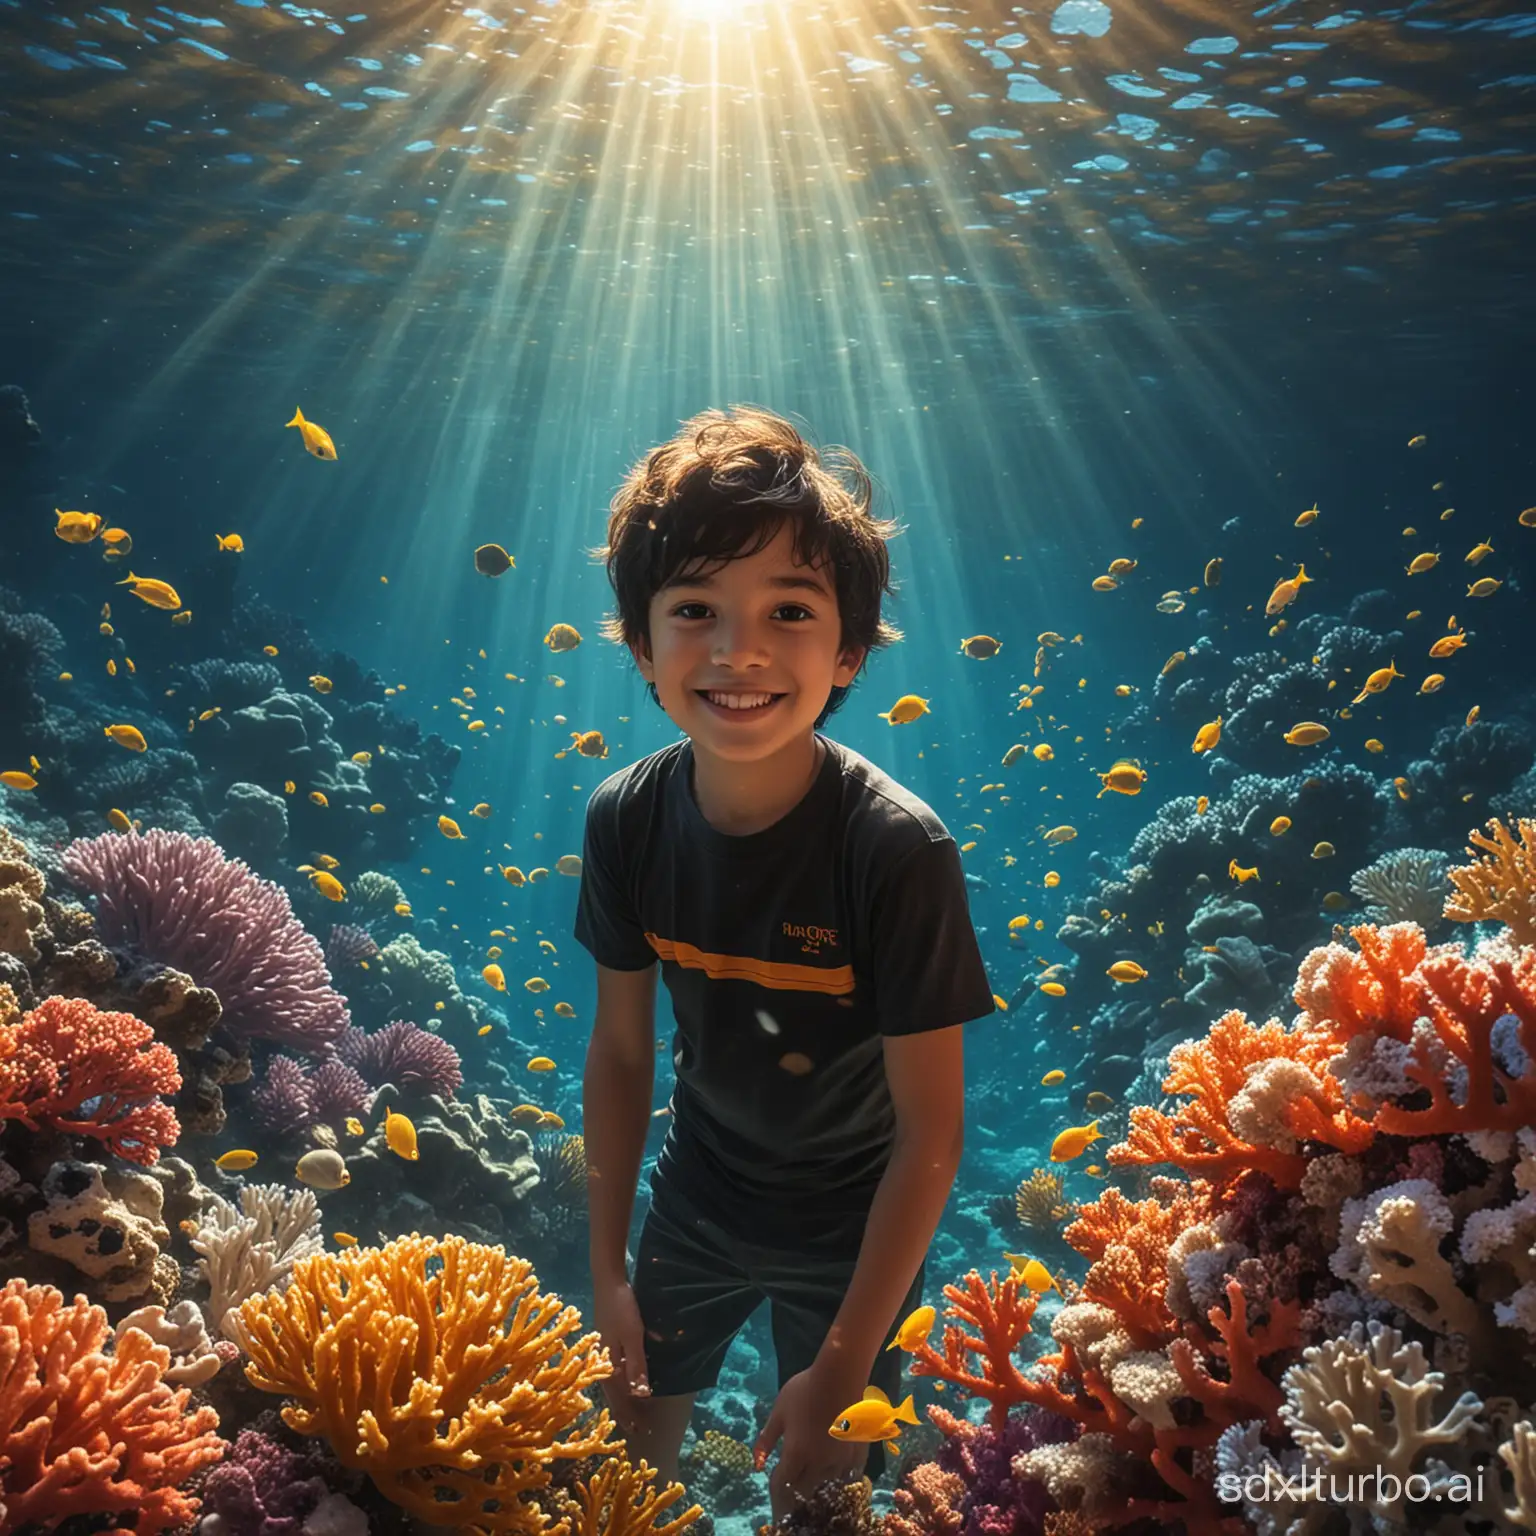 Radiant-Golden-Sunlight-Illuminates-Two-Handsome-Boys-Among-Colorful-Corals-and-Fish